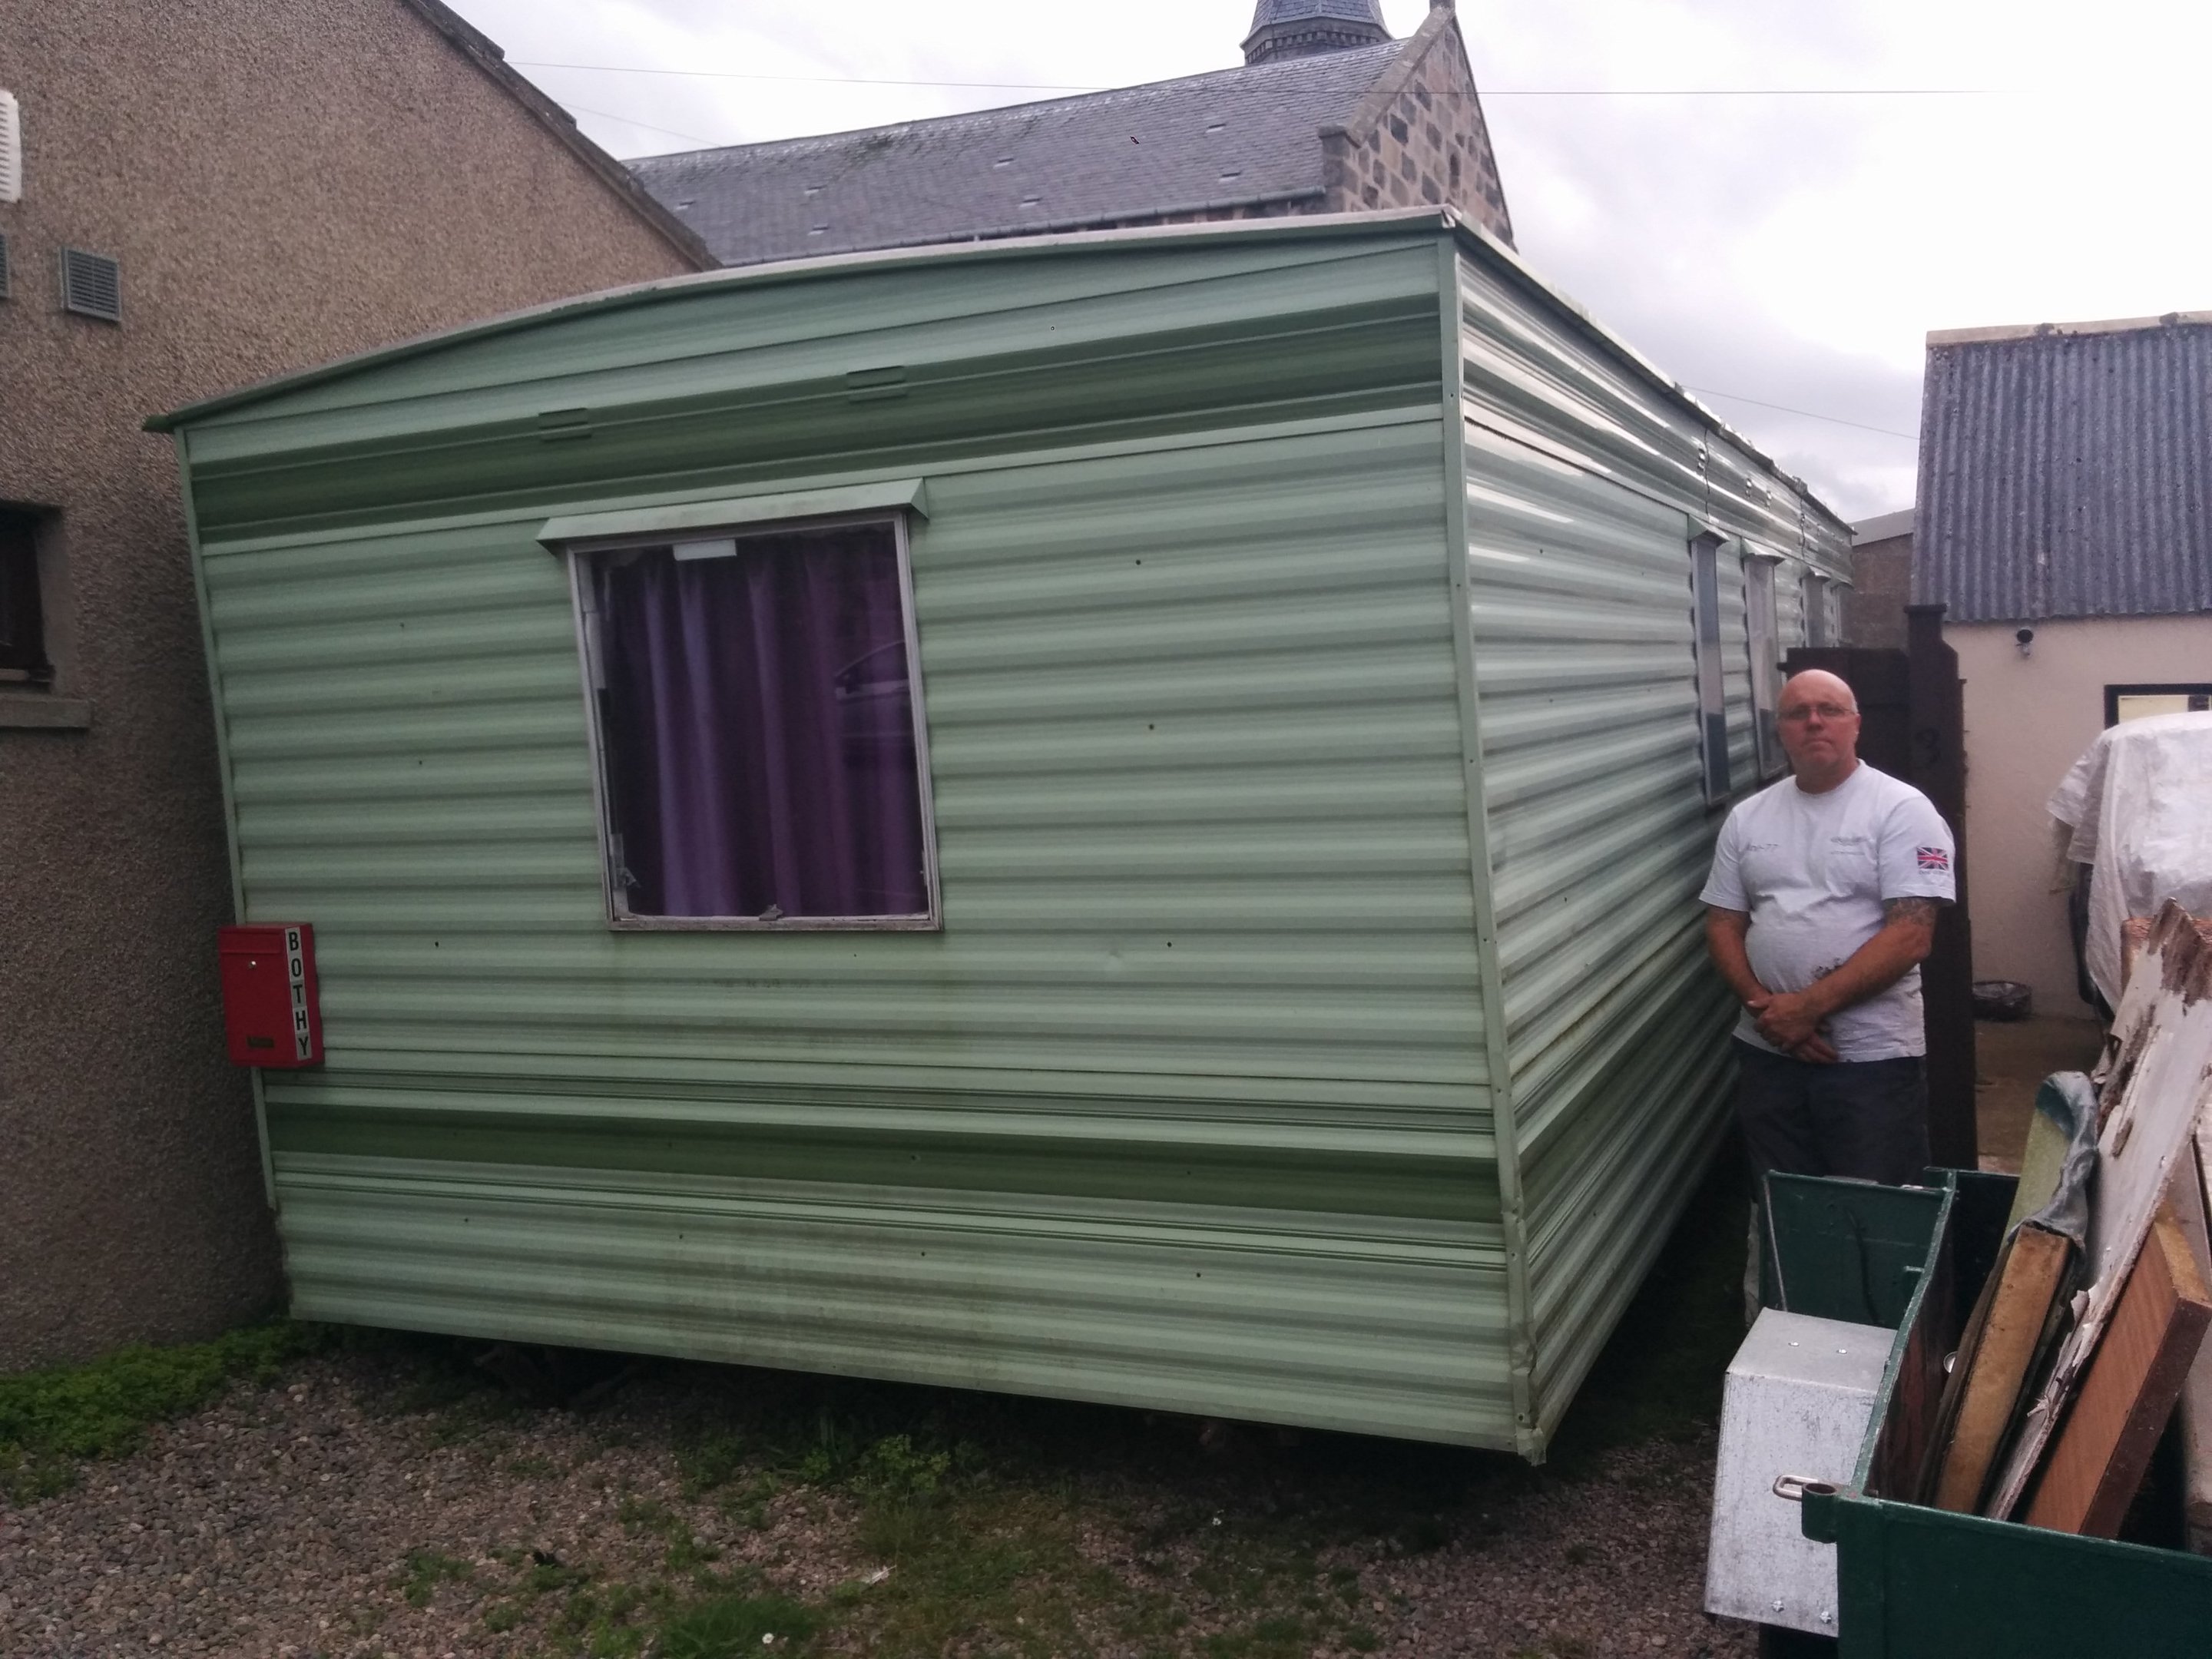 Mr Knowles stands next to the caravan between his home and the restaurant